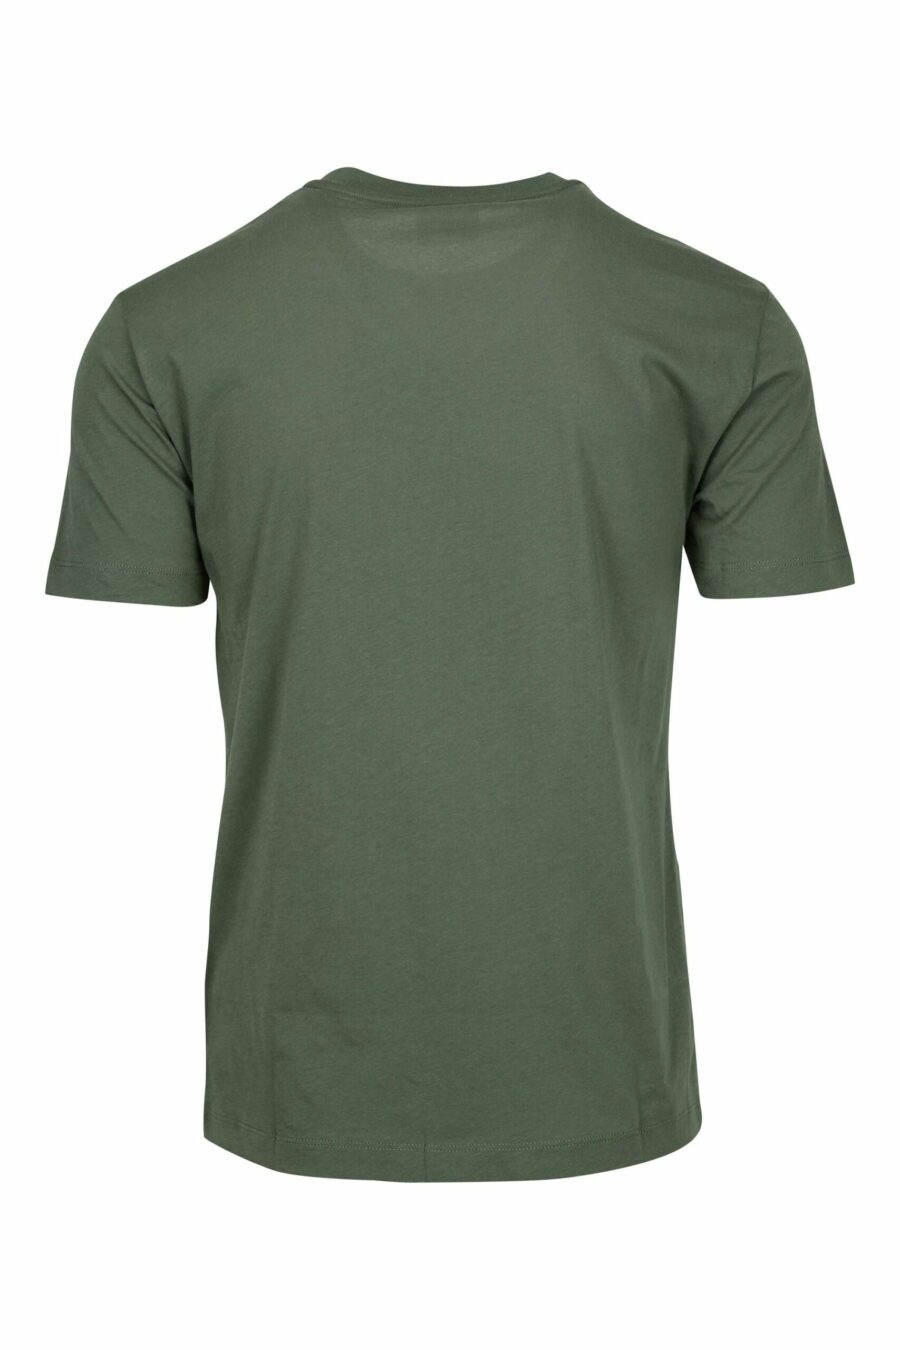 Green T-shirt with gradient "lux identity" maxilogo - 8058947508334 1 scaled